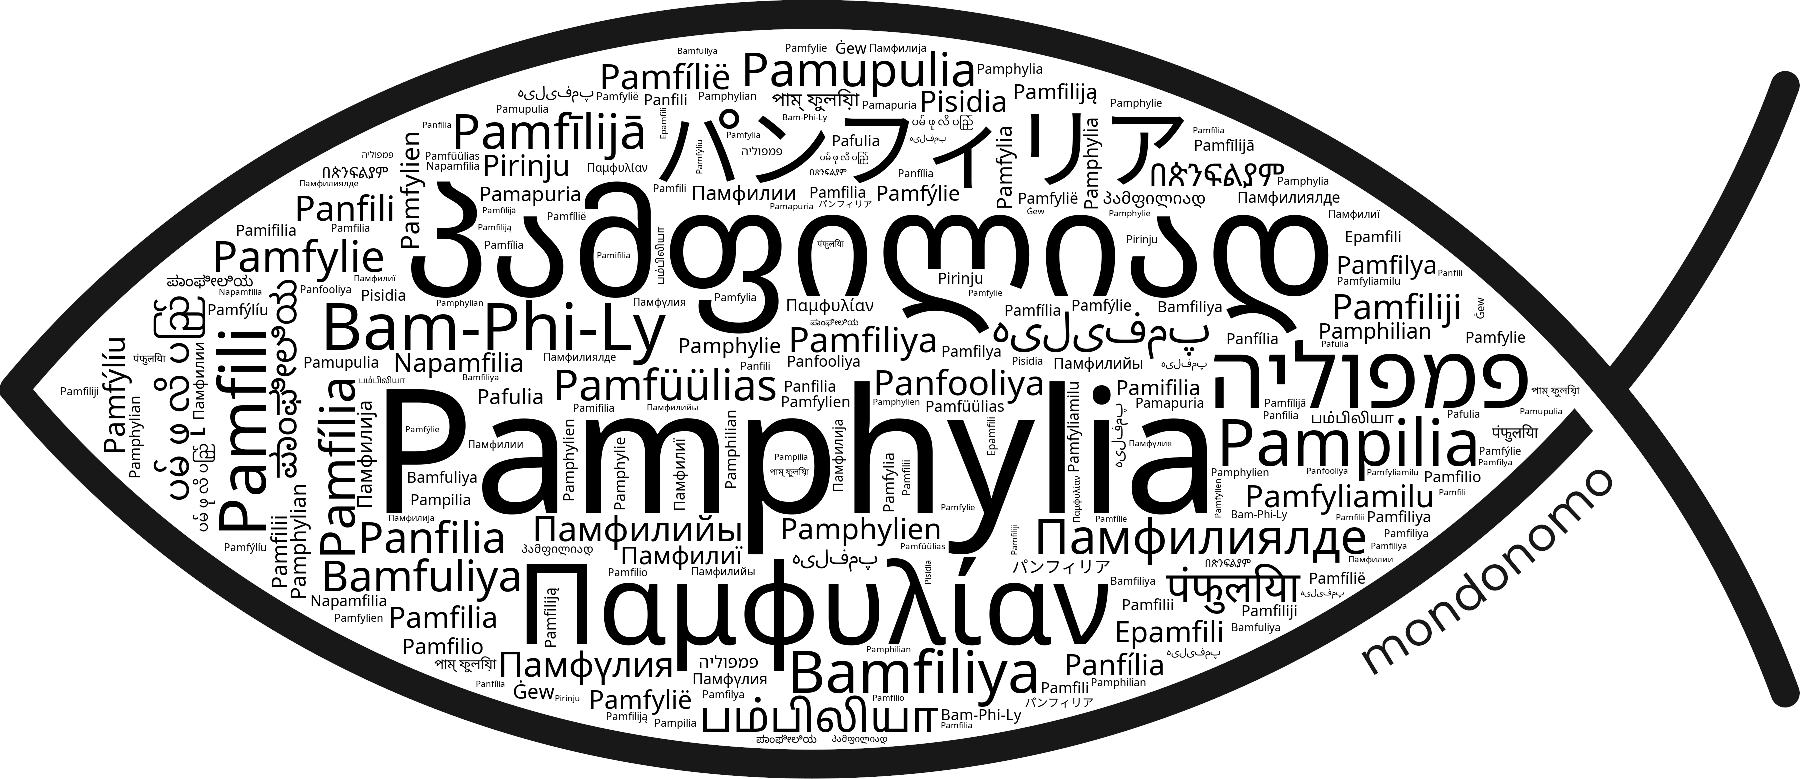 Name Pamphylia in the world's Bibles